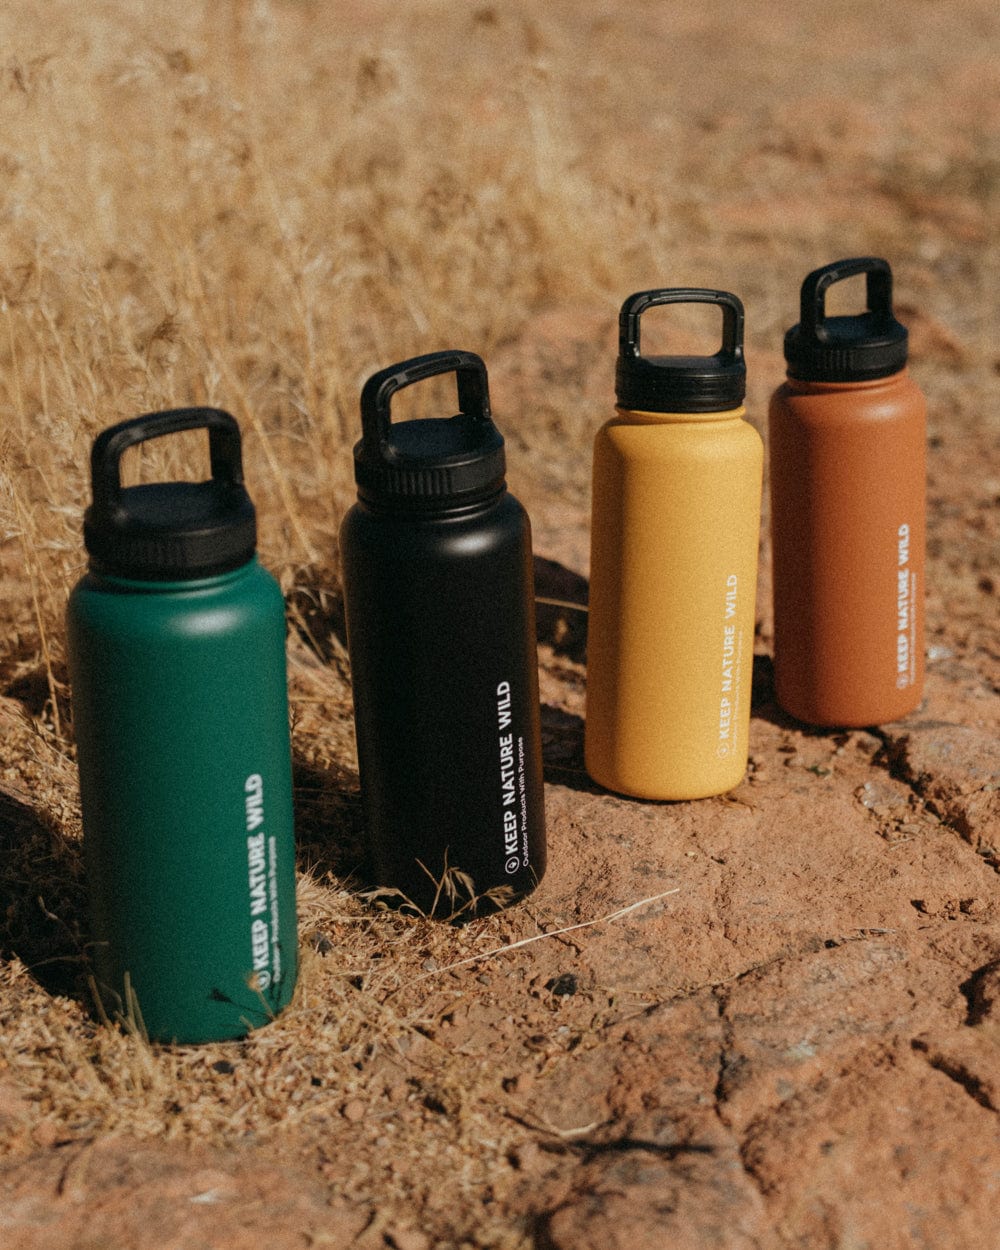 Heat-Insulated Water Bottle Cover Silicone Material Scratch Resistant for  Outing Traveling Camping Green 32OZ 